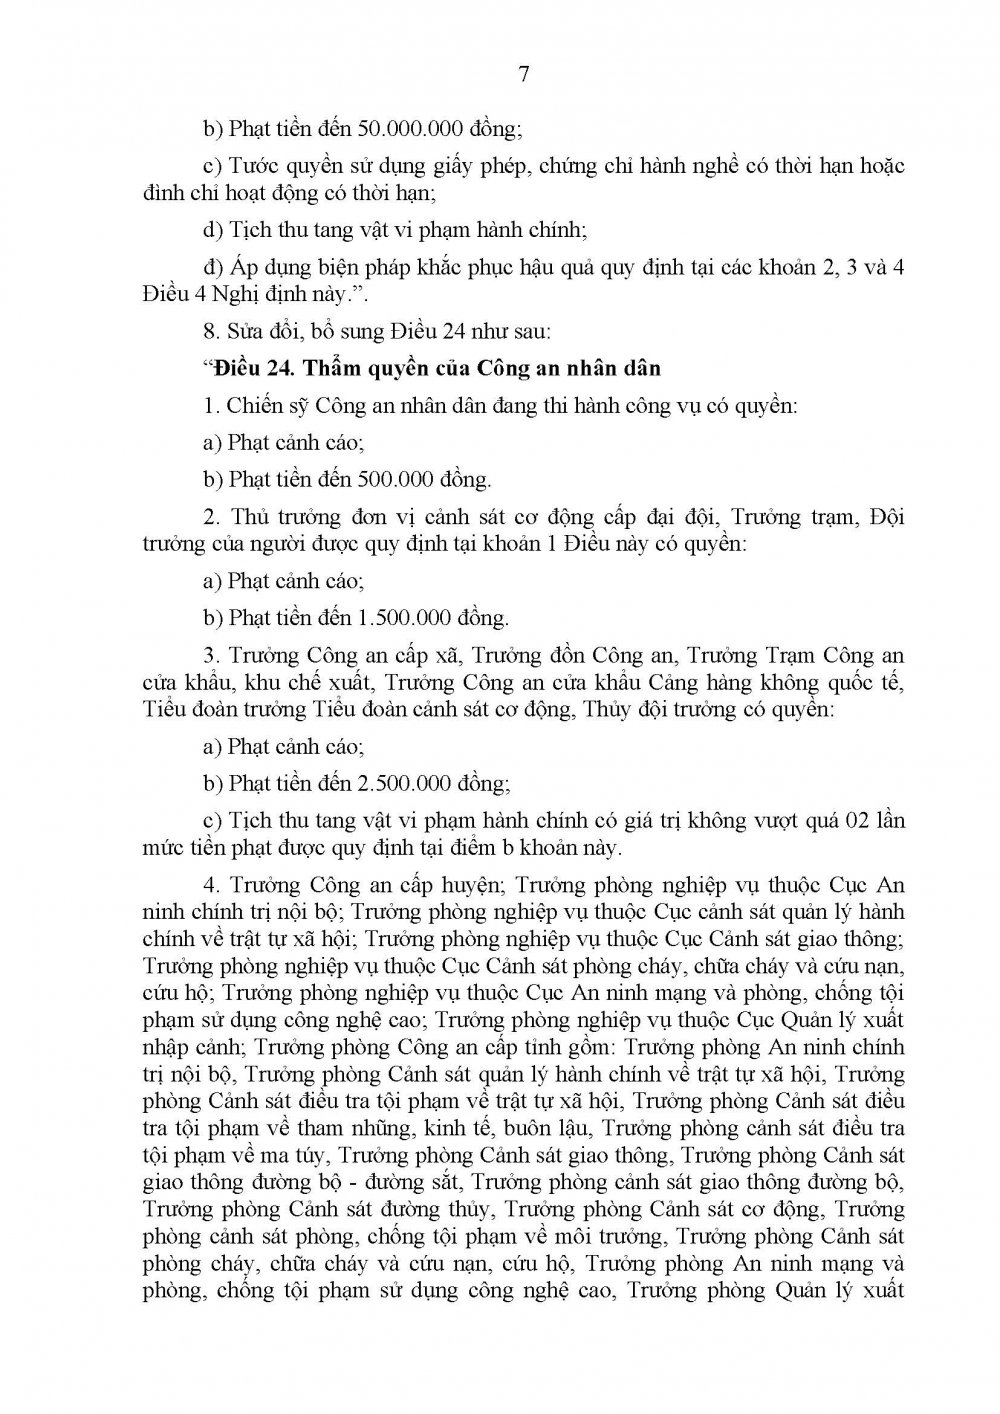 du_thao_2_Page_07